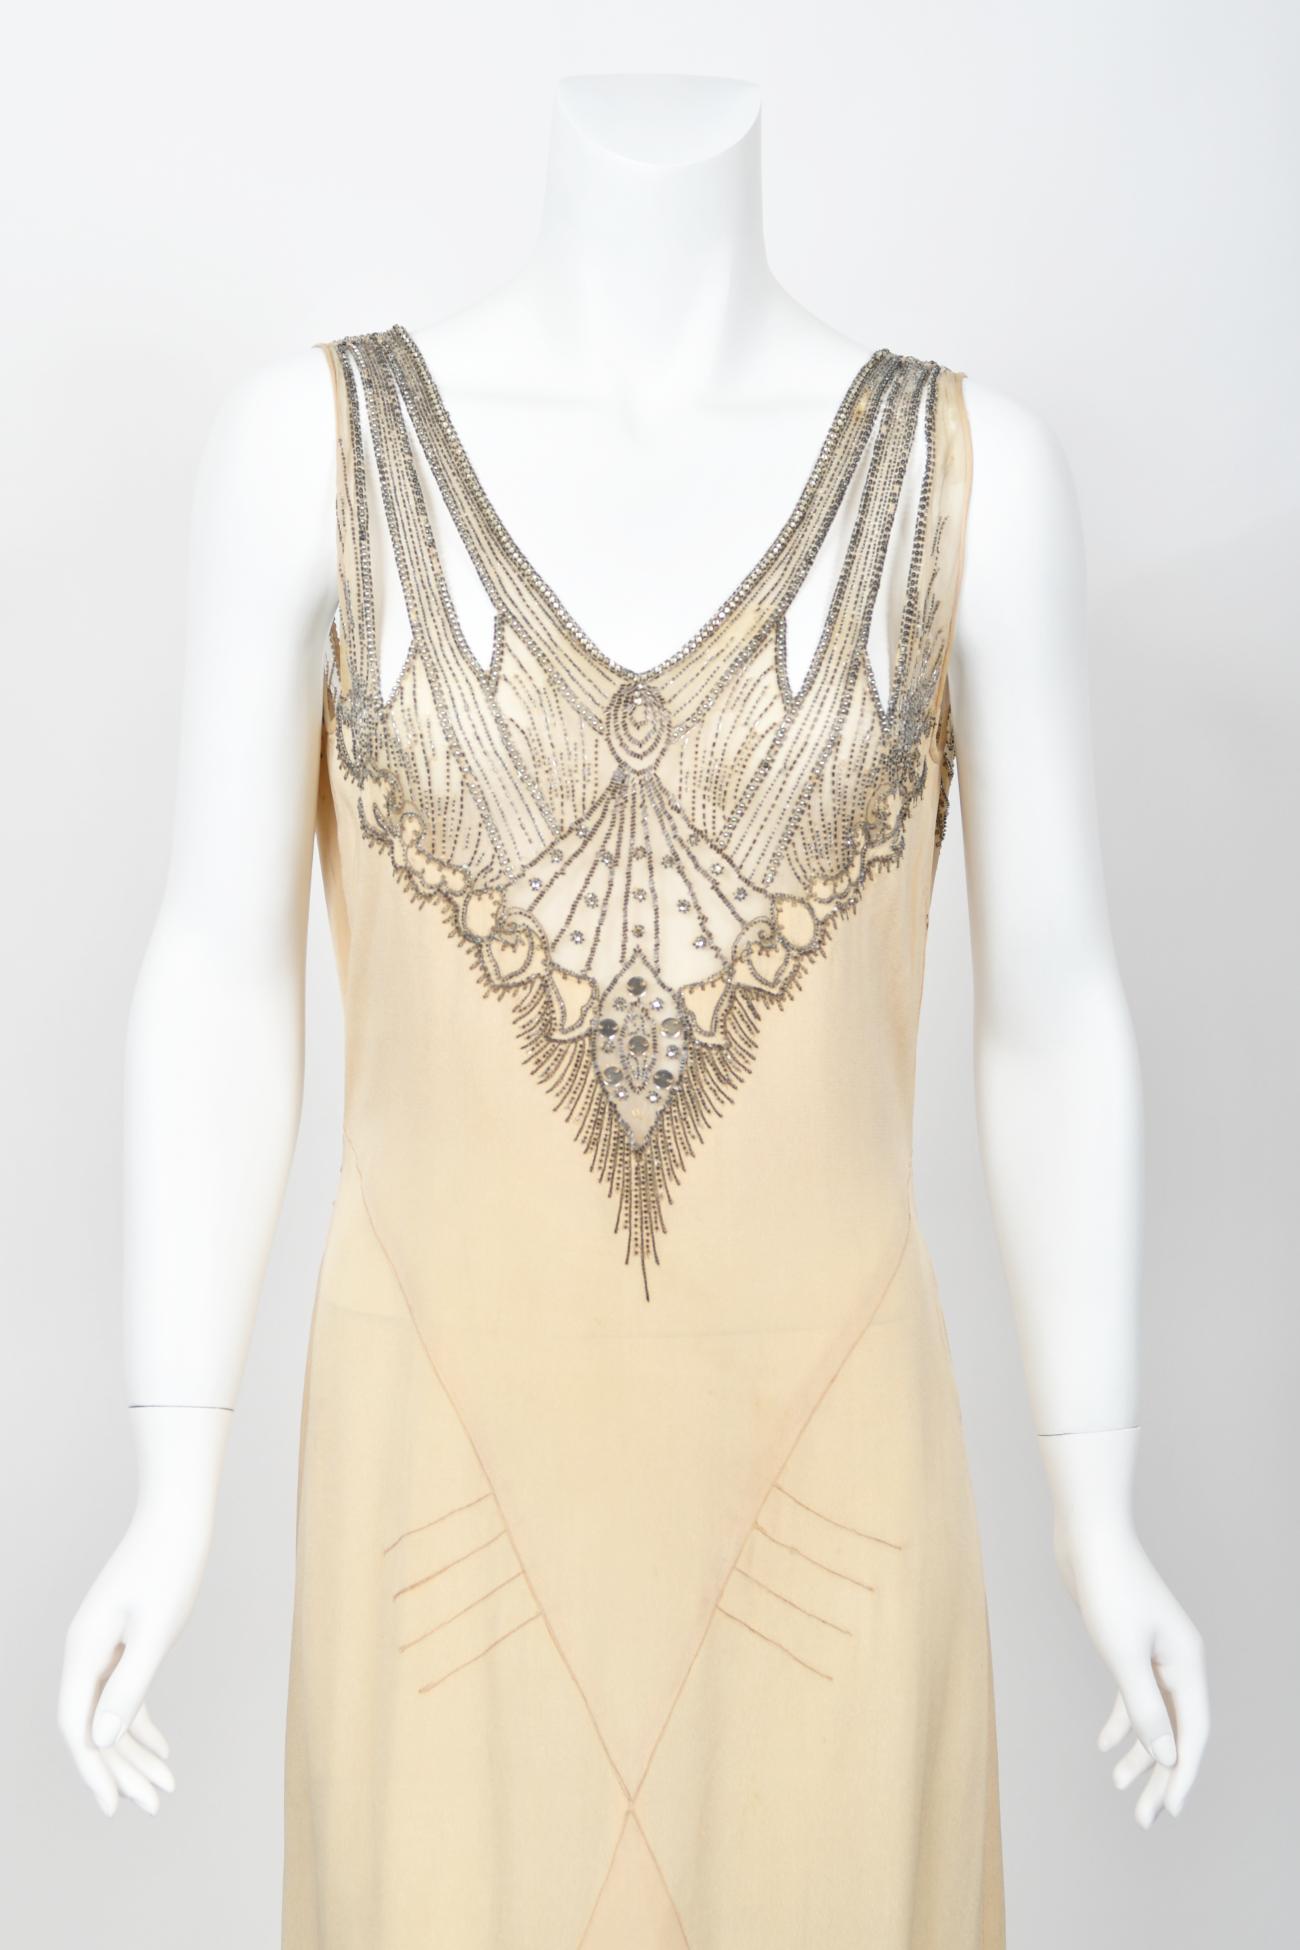 1930's French Ivory Creme Silk Beaded Sheer Illusion Deco Bias-Cut Bridal Gown   For Sale 2